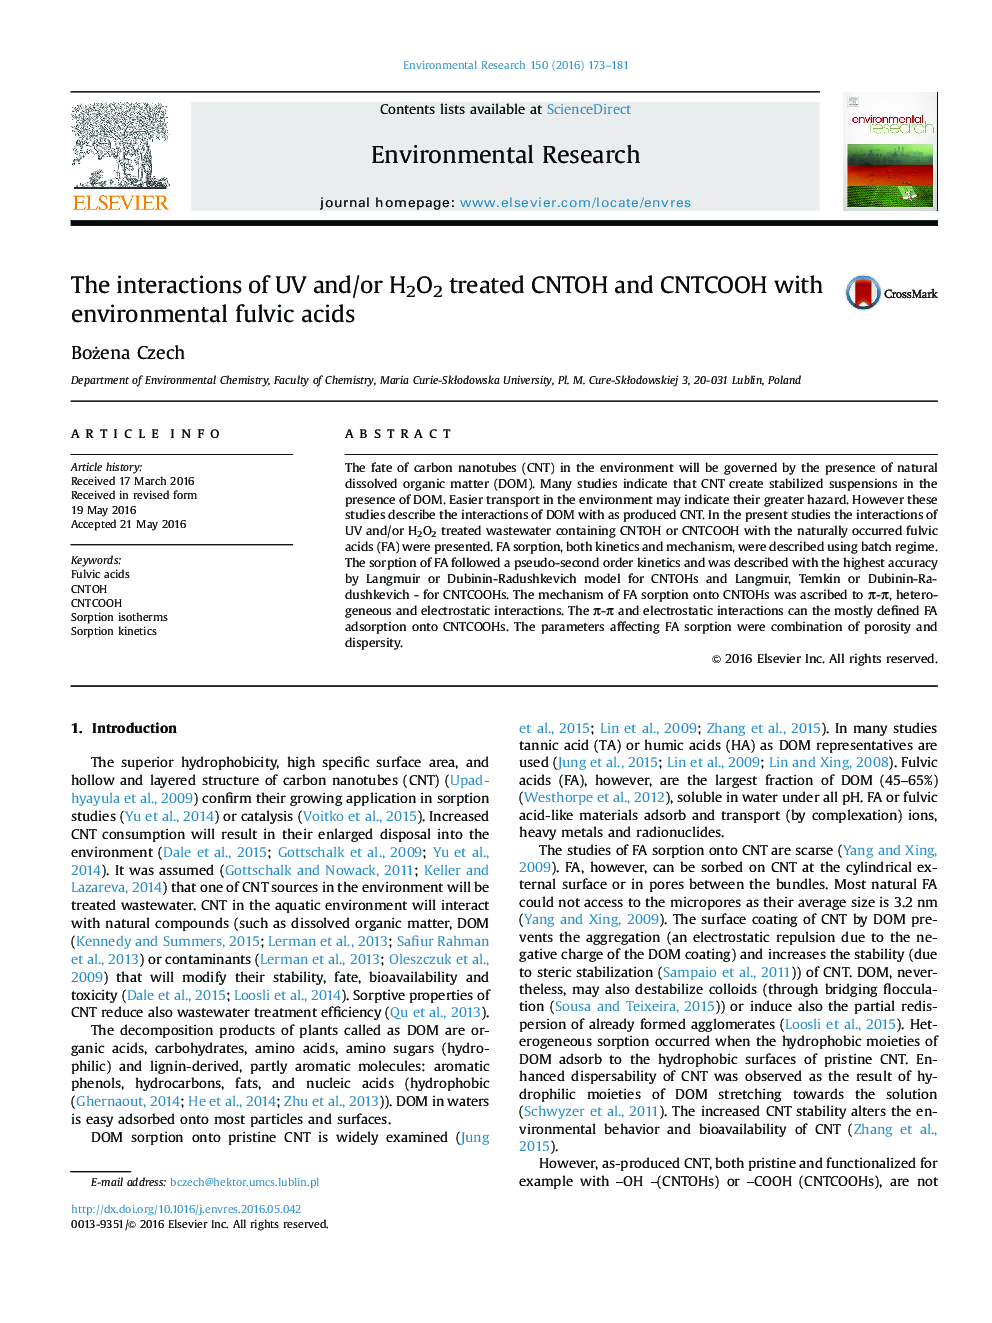 The interactions of UV and/or H2O2 treated CNTOH and CNTCOOH with environmental fulvic acids